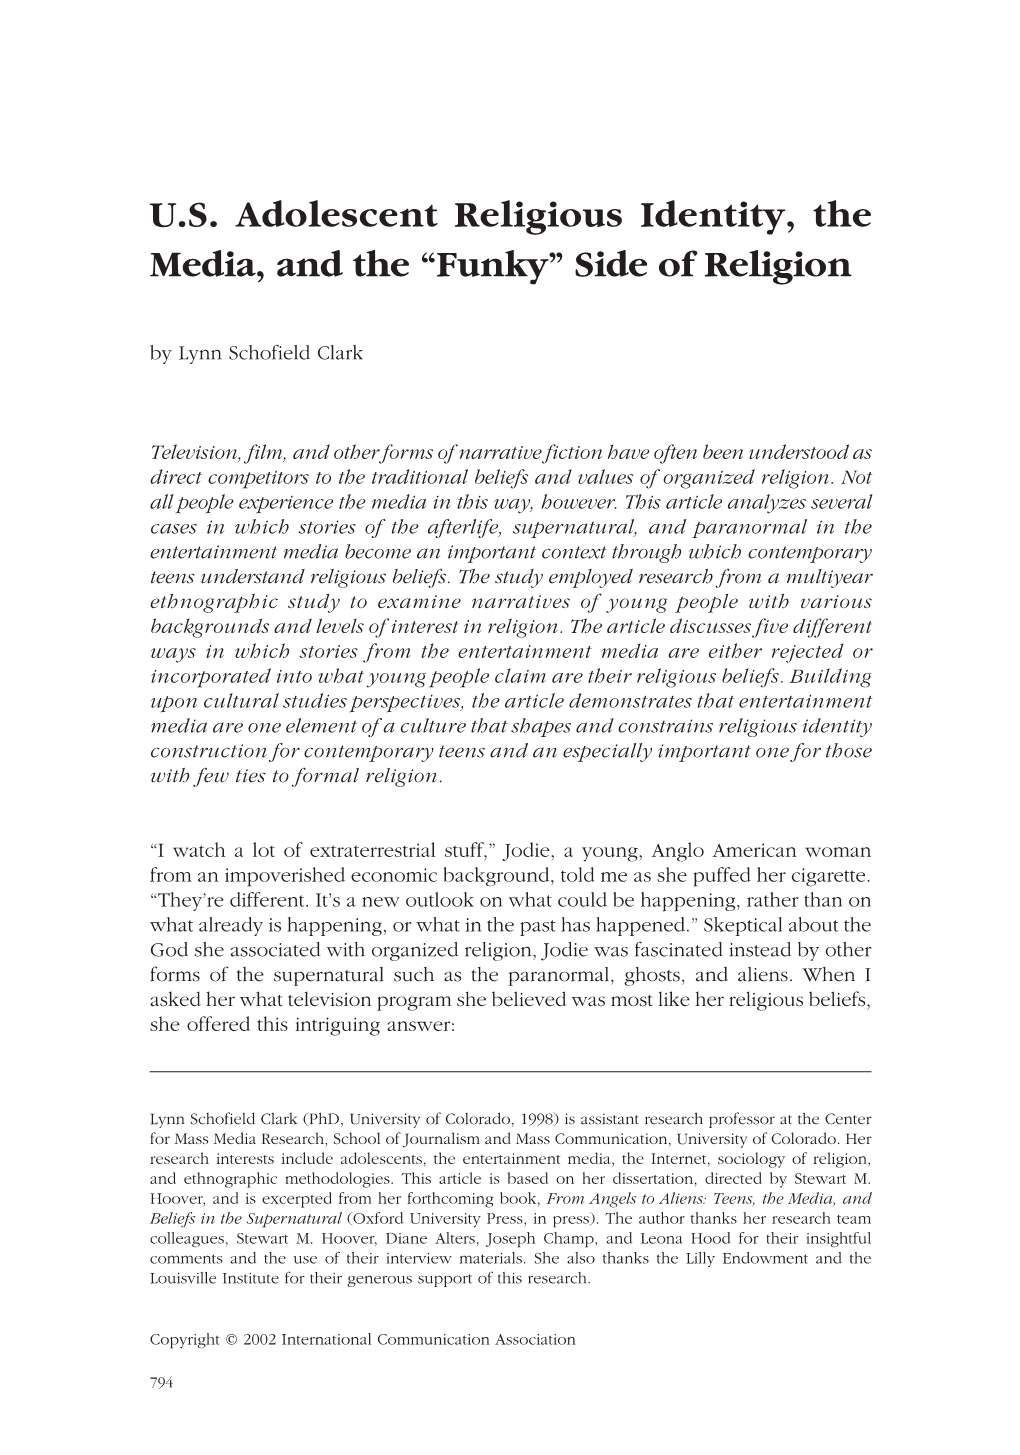 US Adolescent Religious Identity, the Media, and the “Funky”